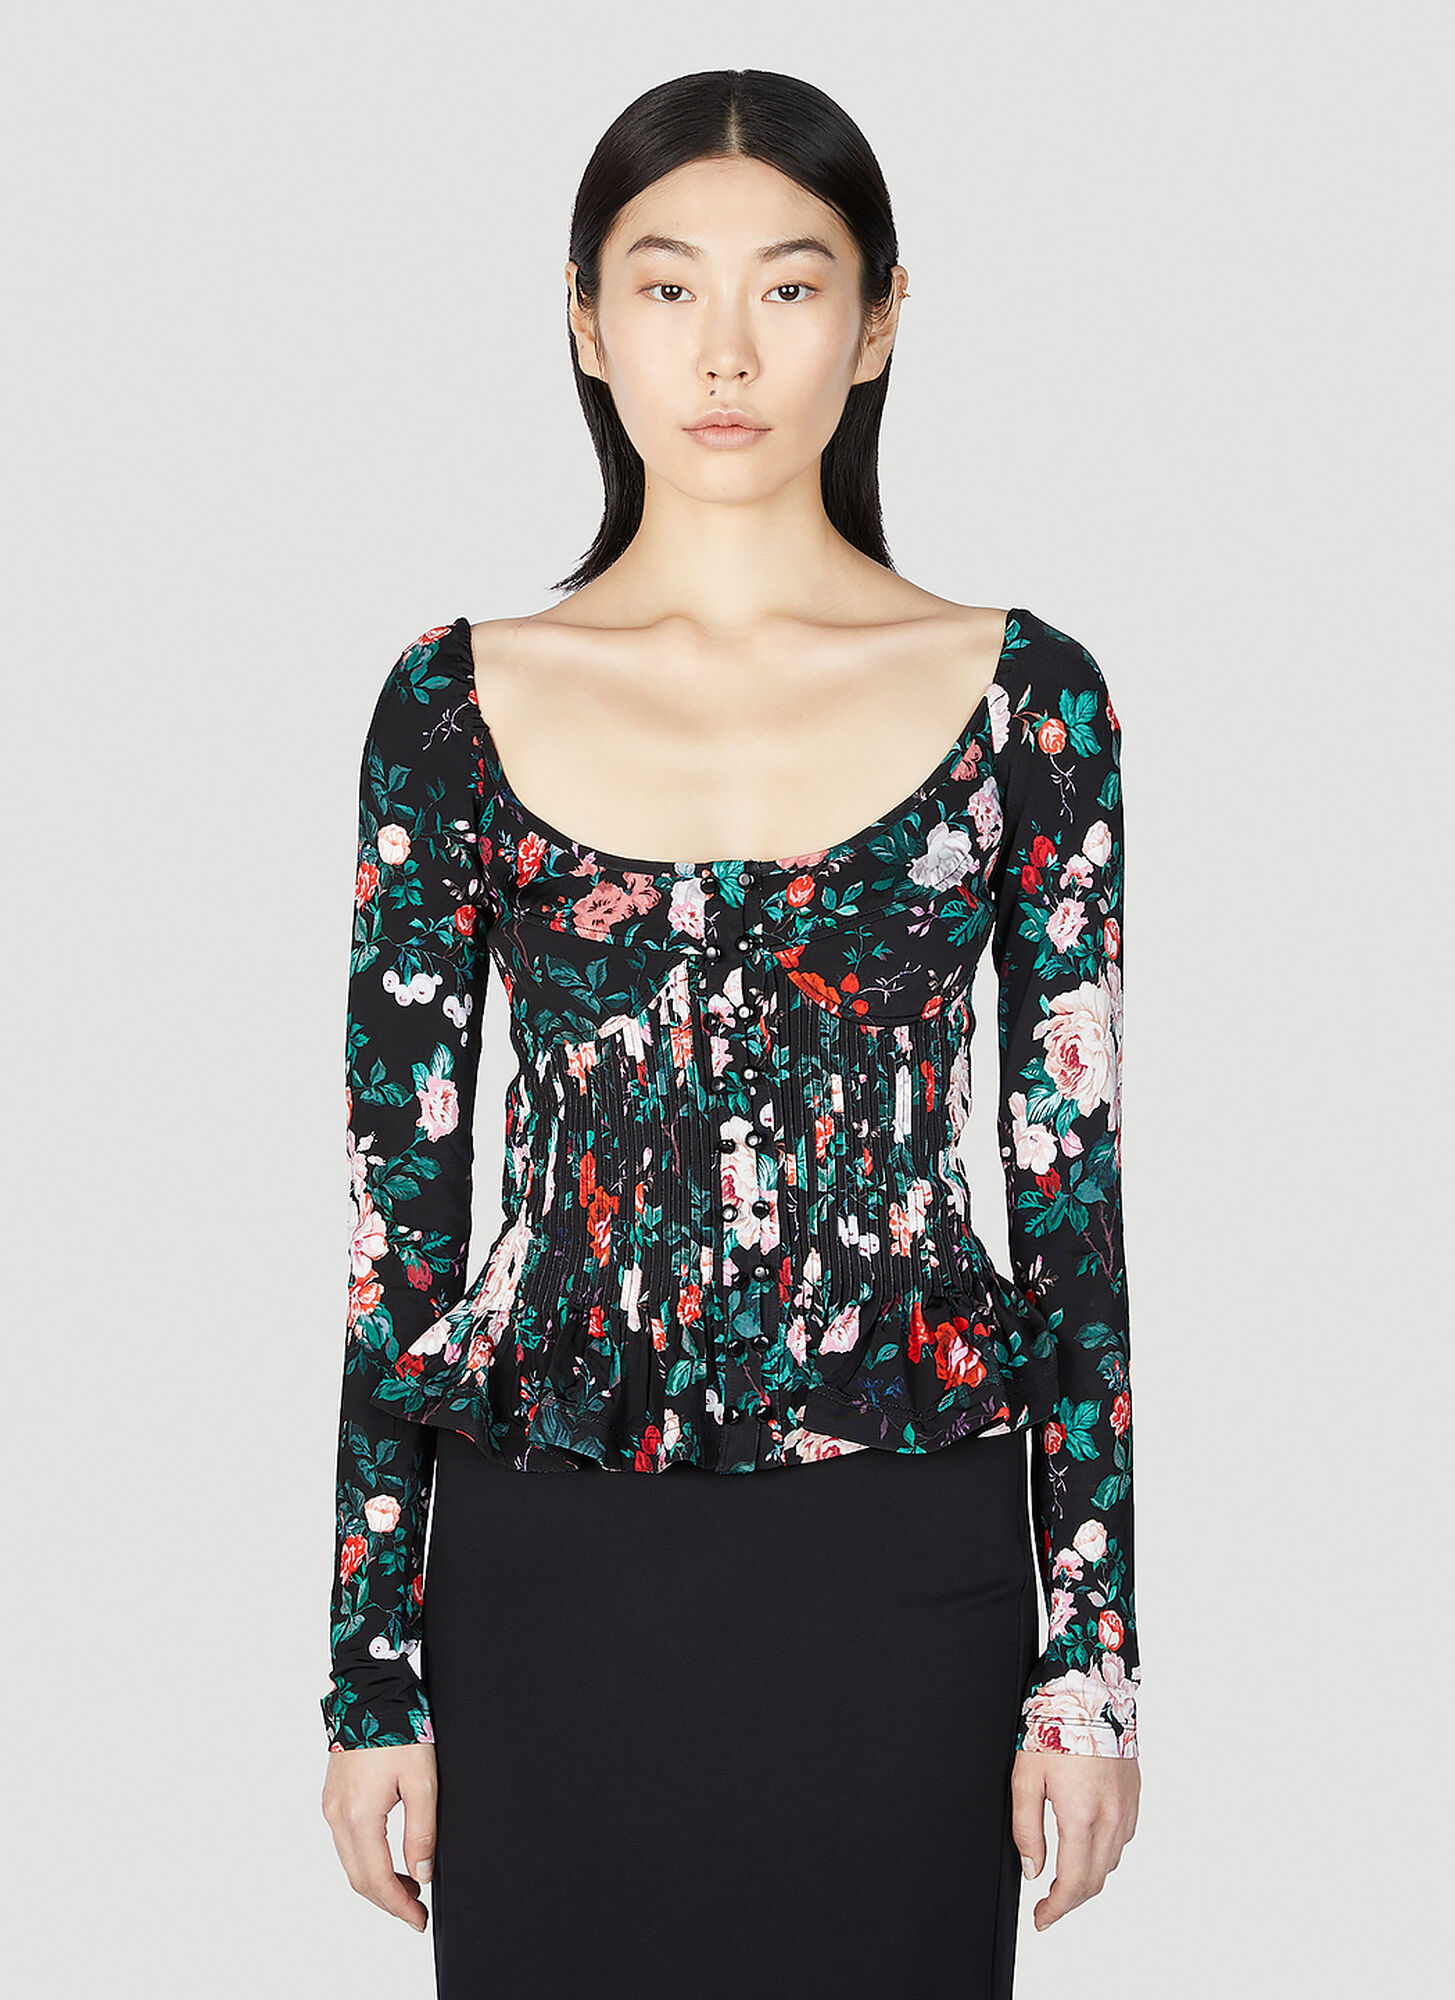 Paco Rabanne Black Rose Sculpted Top